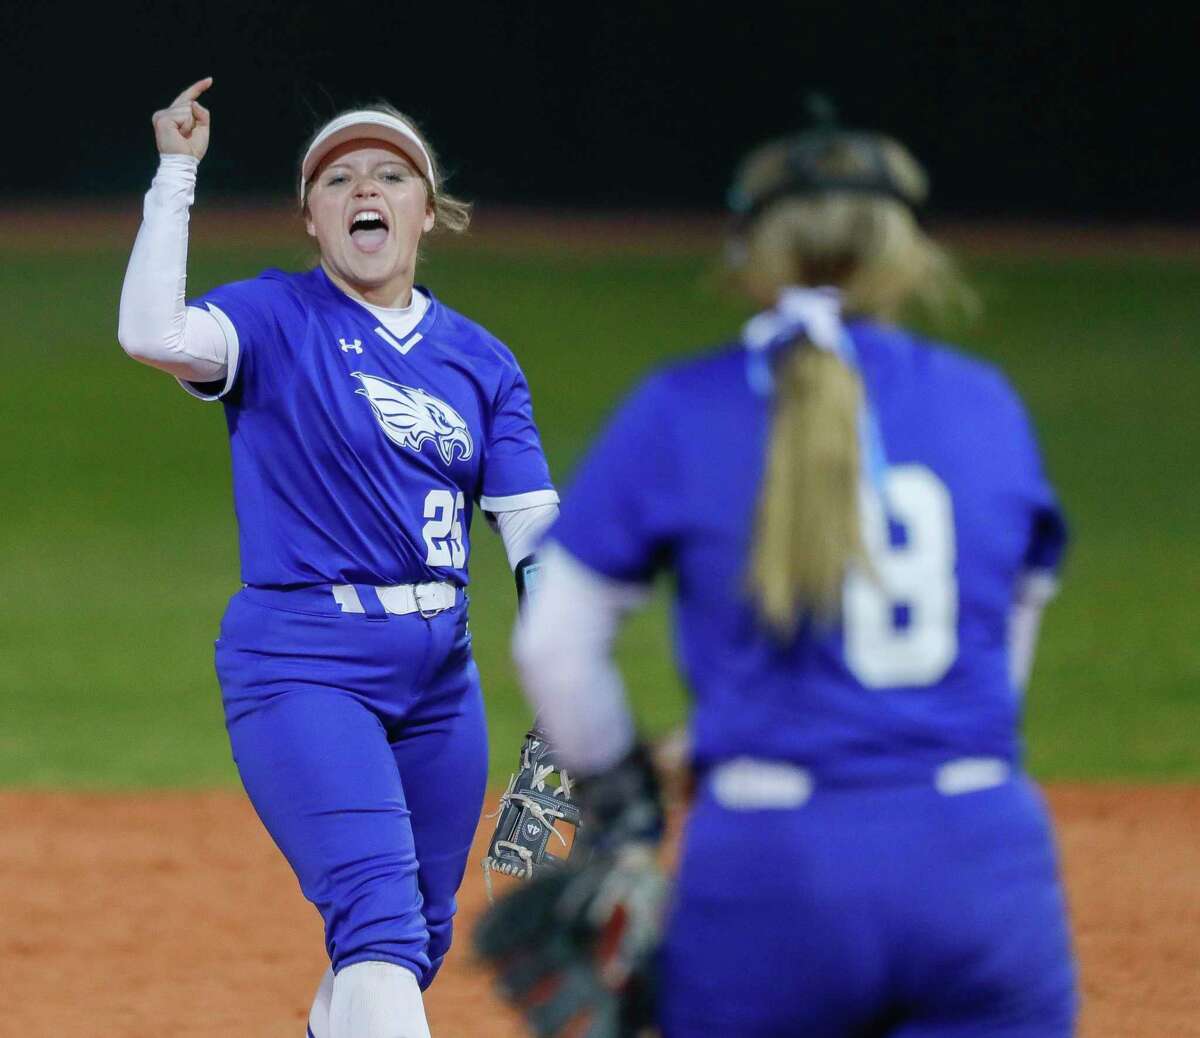 New Caney second baseman Mckenna Rinewalt (25) cheers on starting pitcher Skylar Scott after a strikeout during the second inning of a high school softball game at Lake Creek High School, Wednesday, March 9, 2022, in Montgomery.